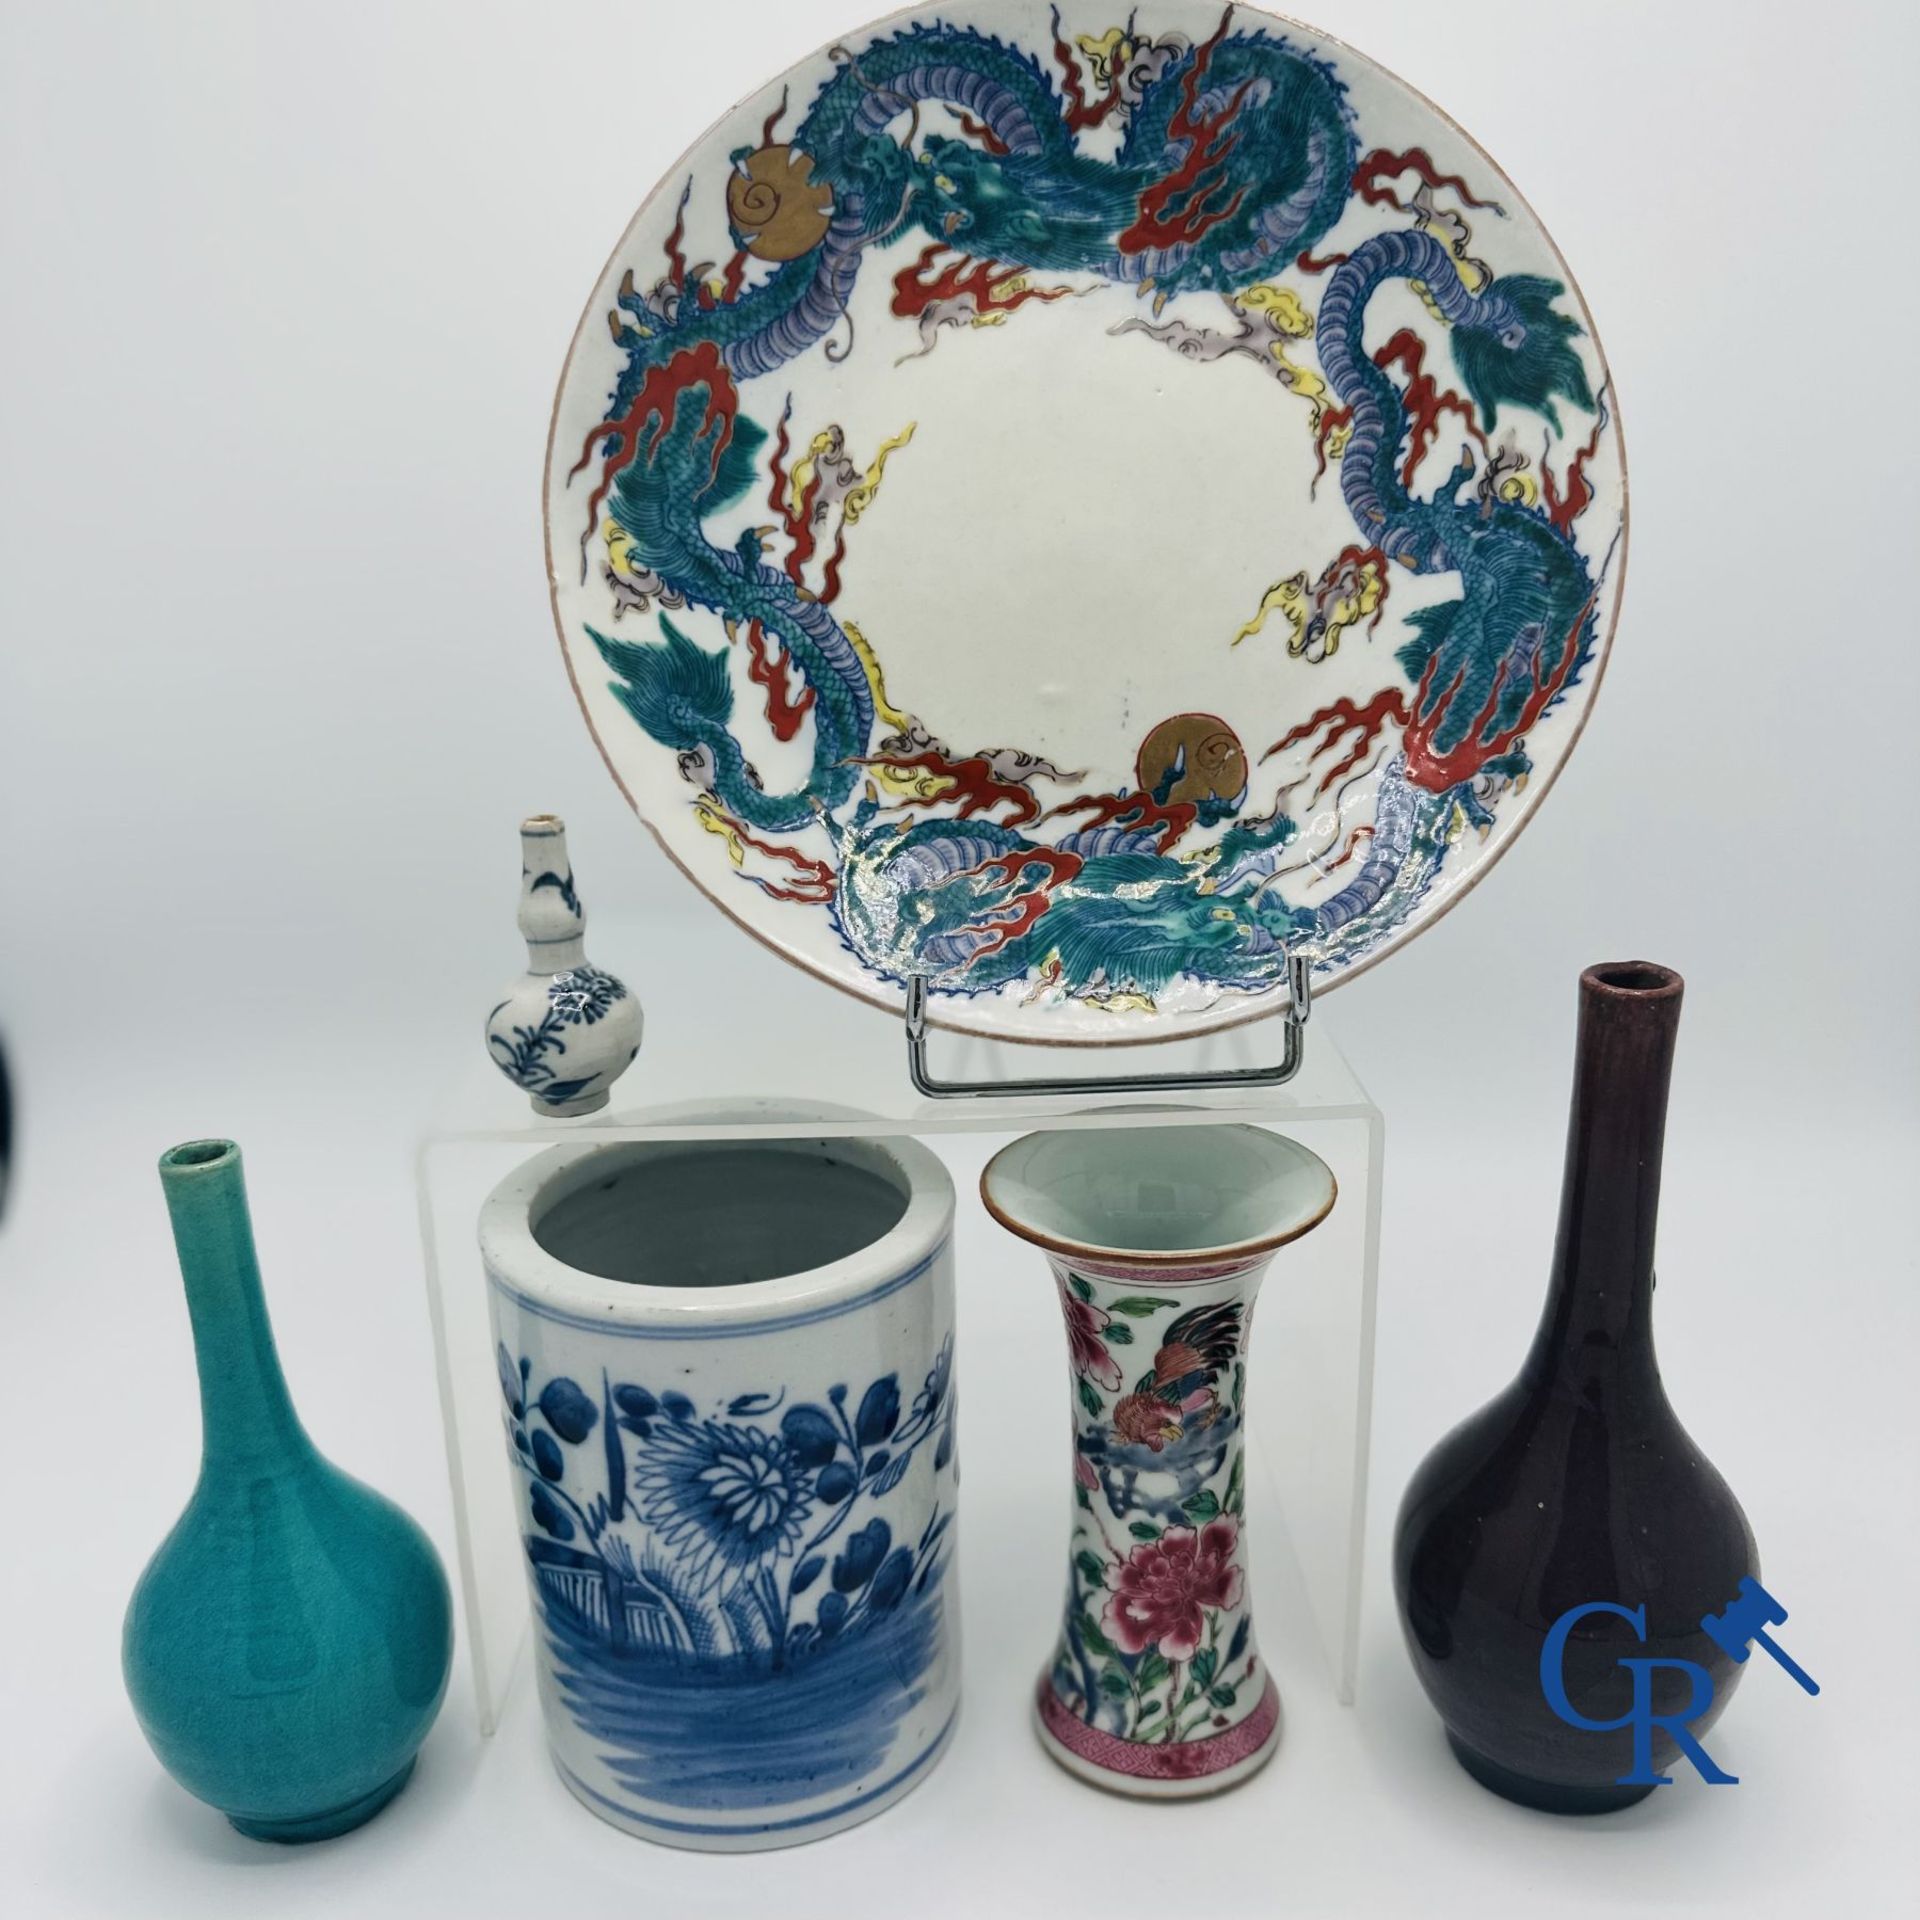 Chinese Porcelain: Lot of 6 different pieces of Chinese porcelain. 18th and 19th century.